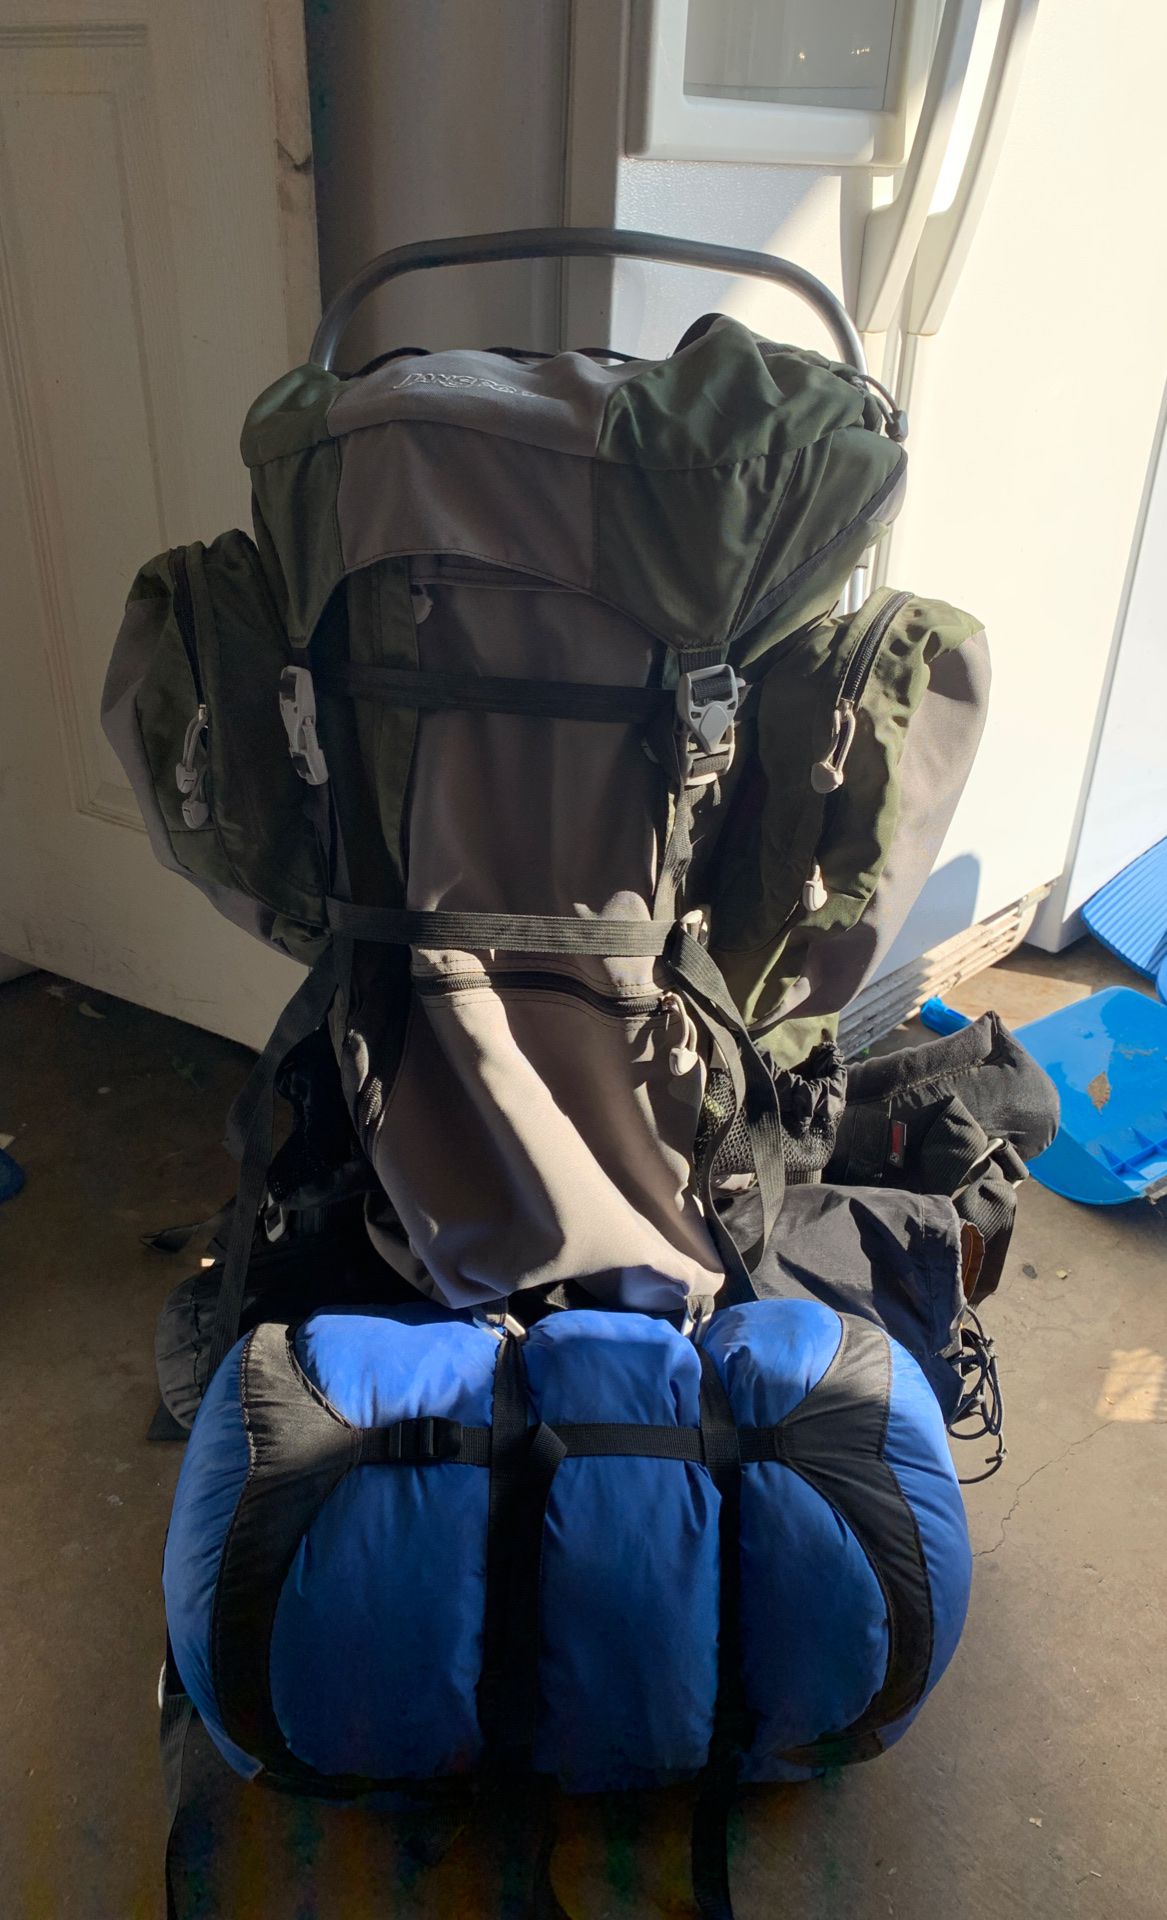 Hiking backpack with tent and sleeping bag